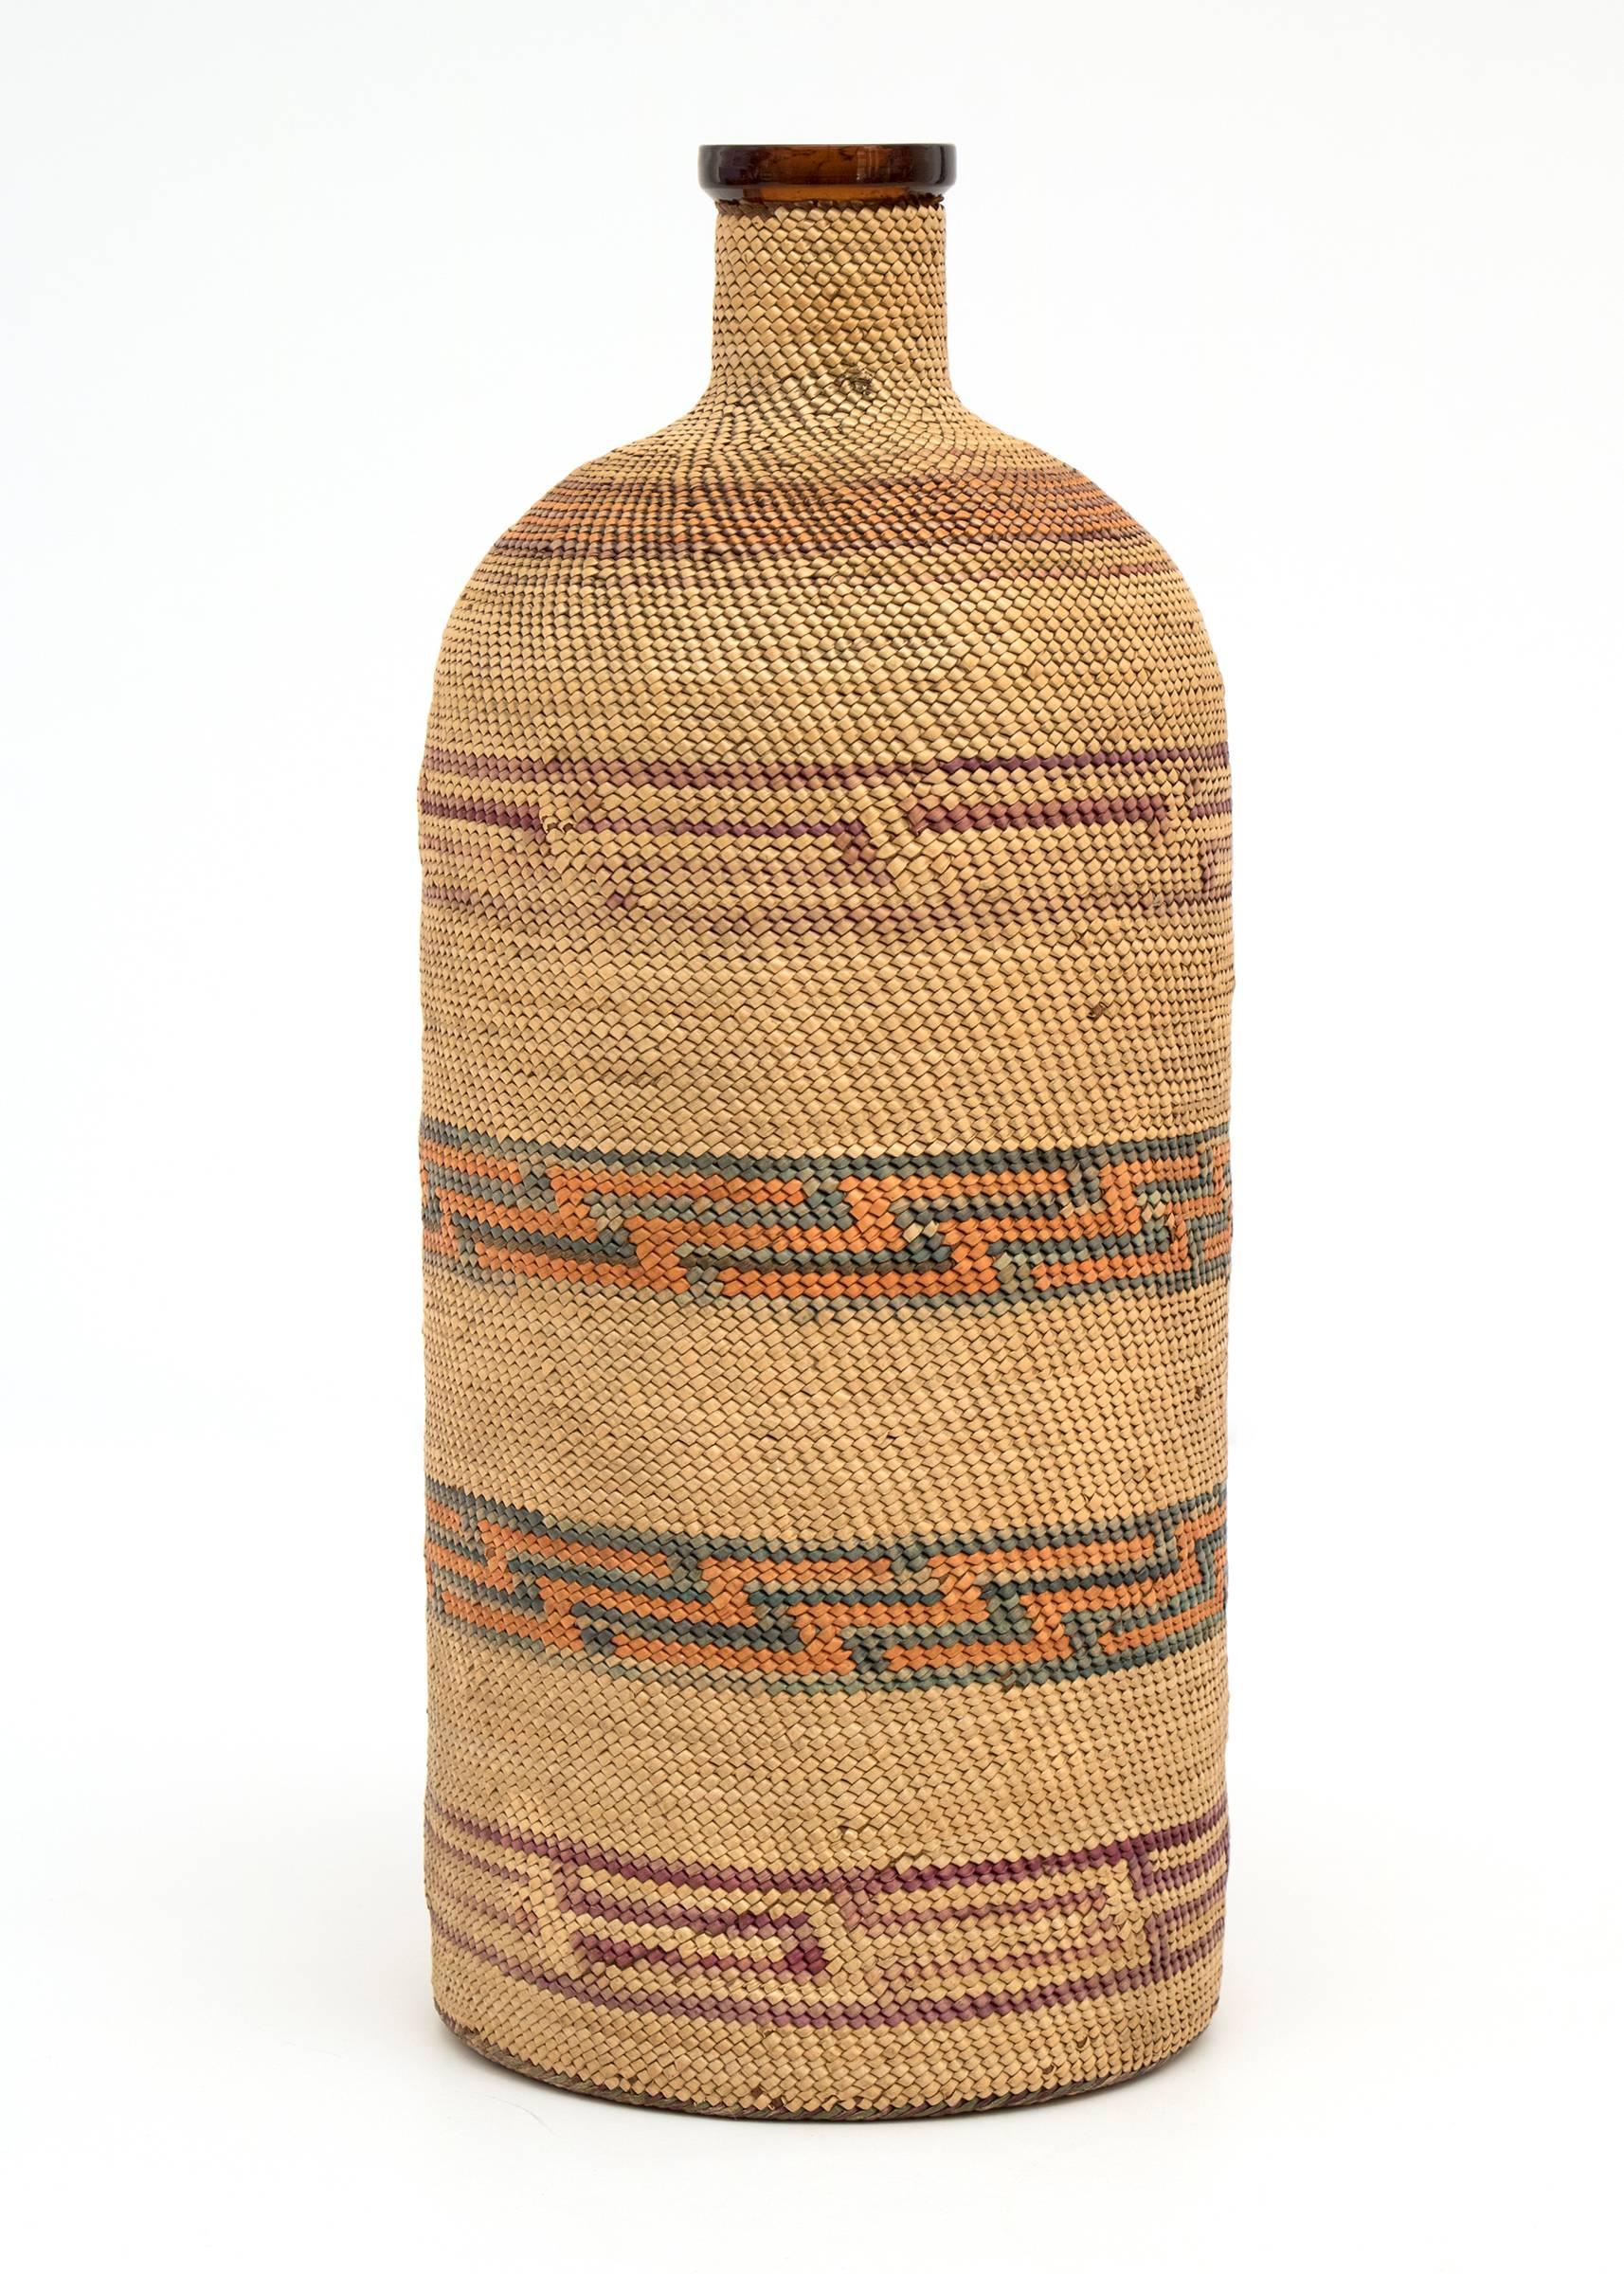 A bottle overlaid with intricate weaving by a member of the Micmac (Mi'kmaq or Míkmaq) tribe.

The Micmac are original natives of the Northeastern Woodlands of the United States and Canada including present-day New Brunswick or Nova Scotia, Quebec,